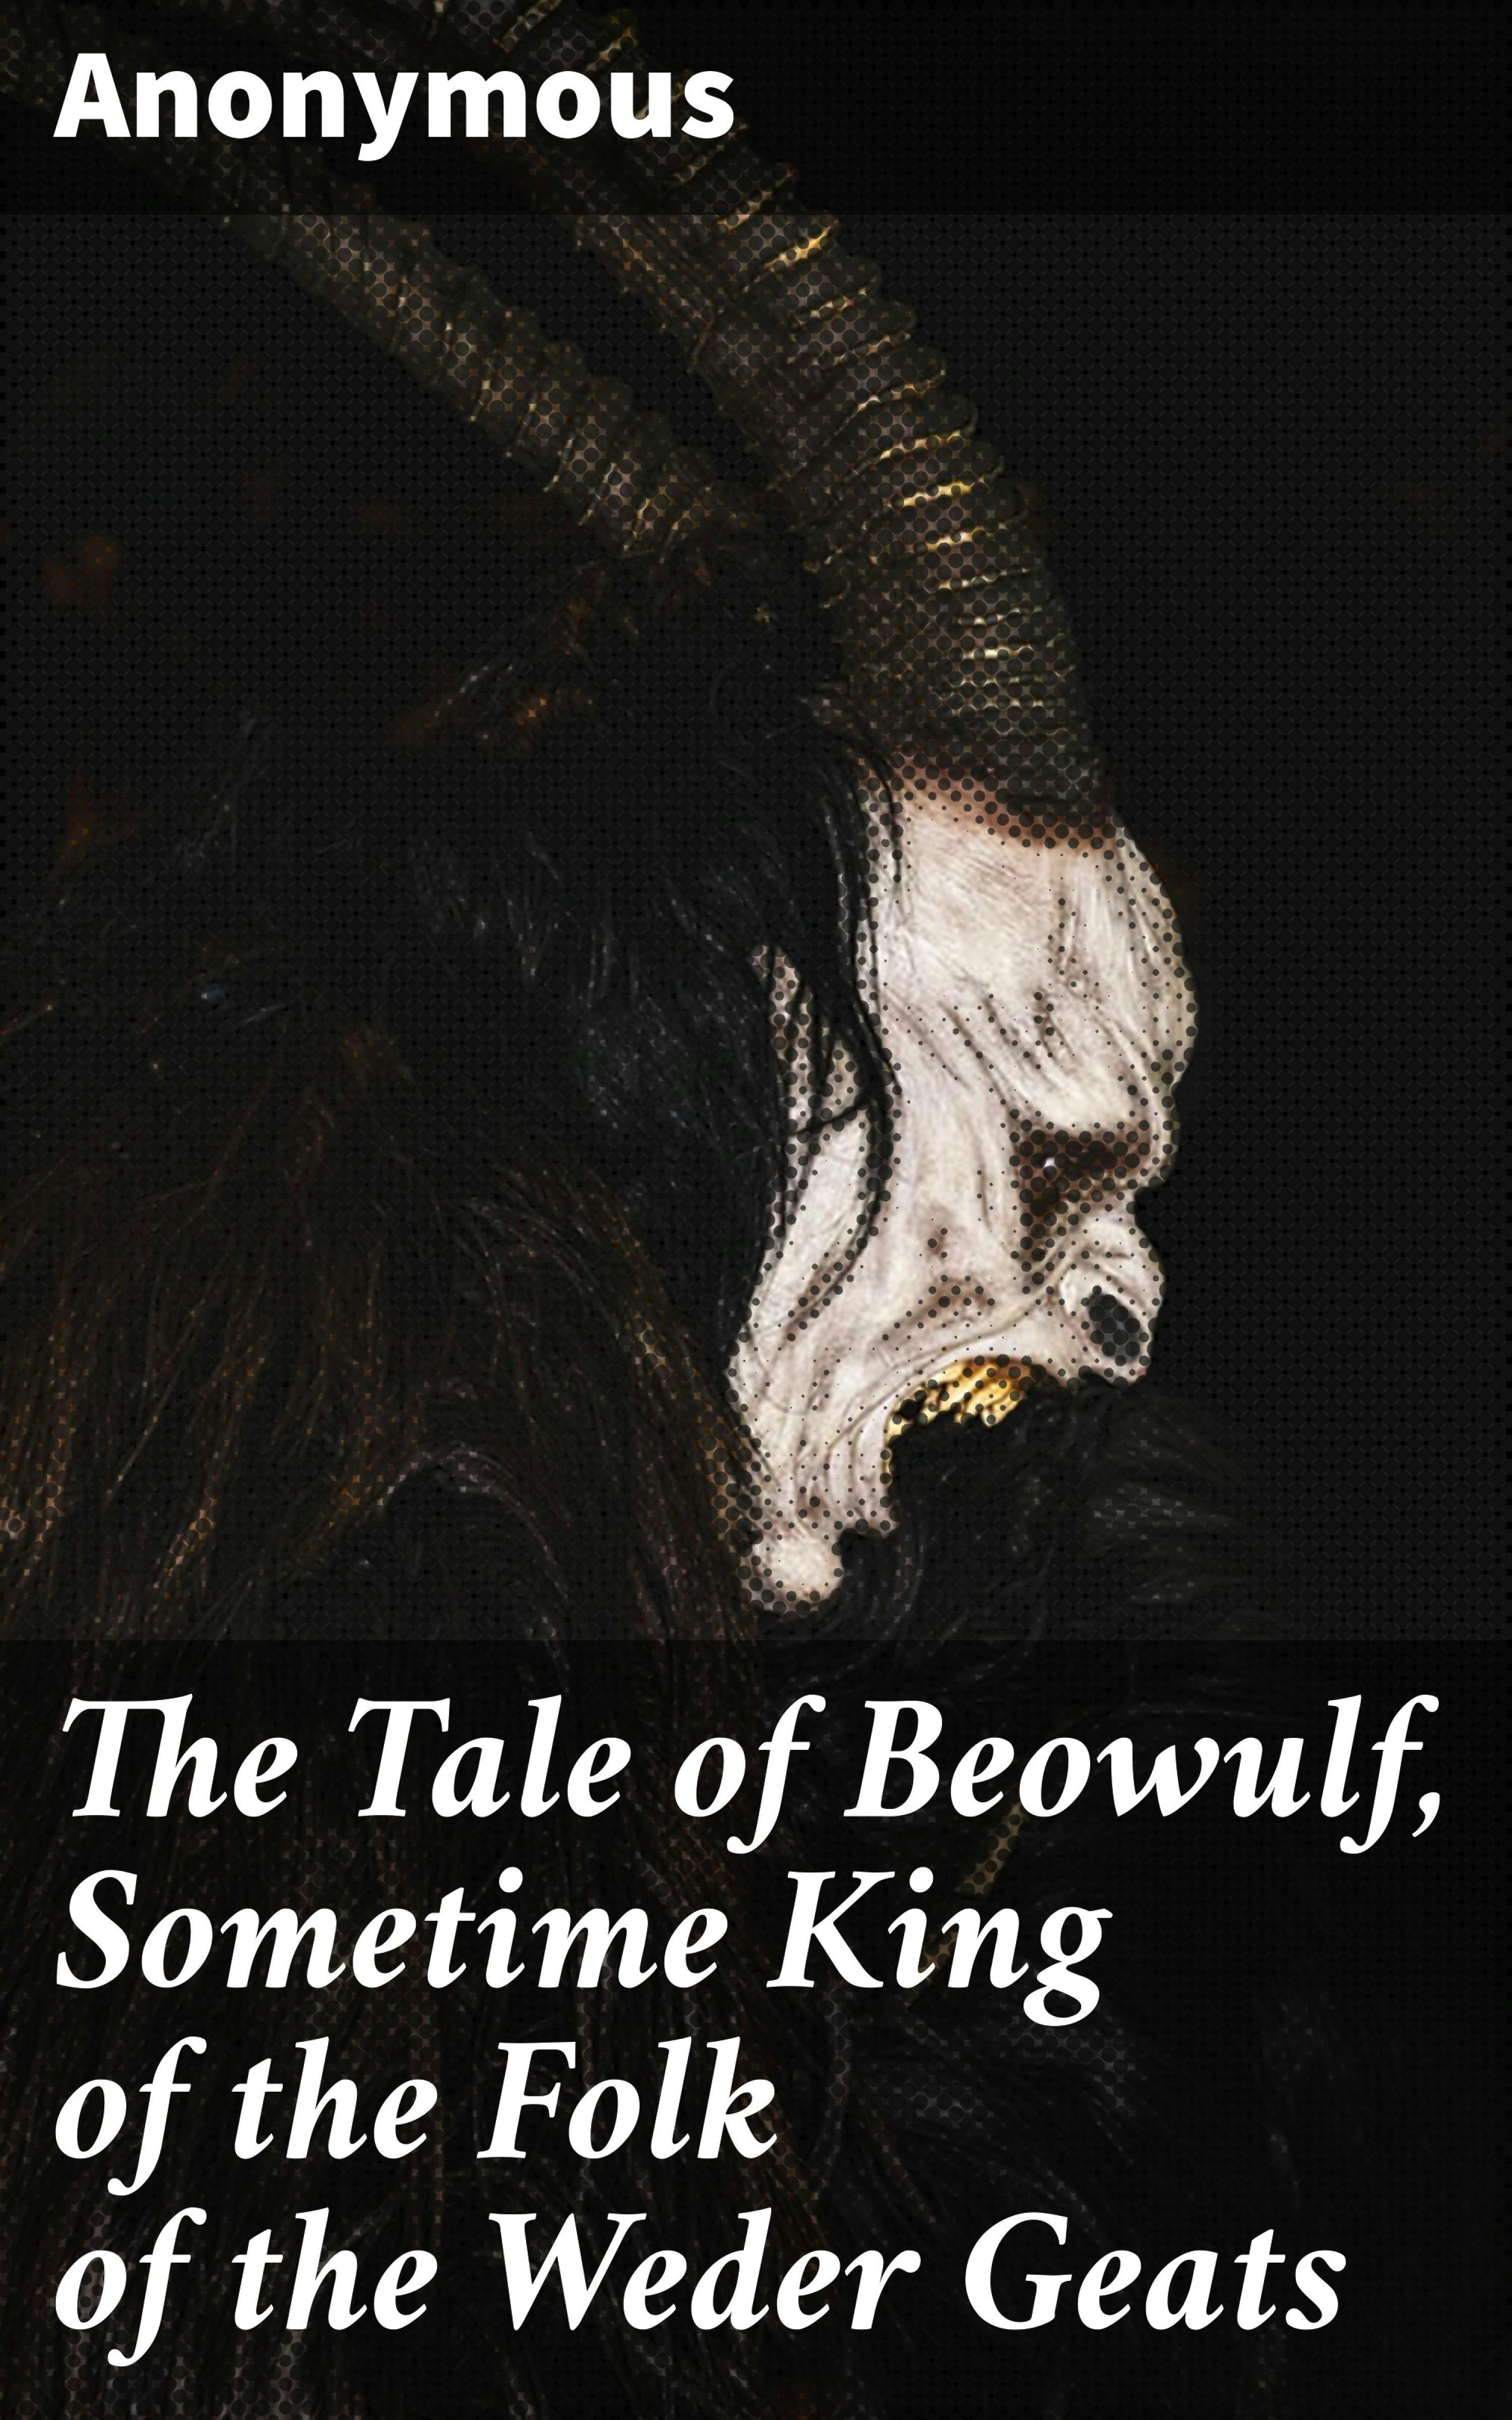 The Tale of Beowulf, Sometime King of the Folk of the Weder Geats - undefined